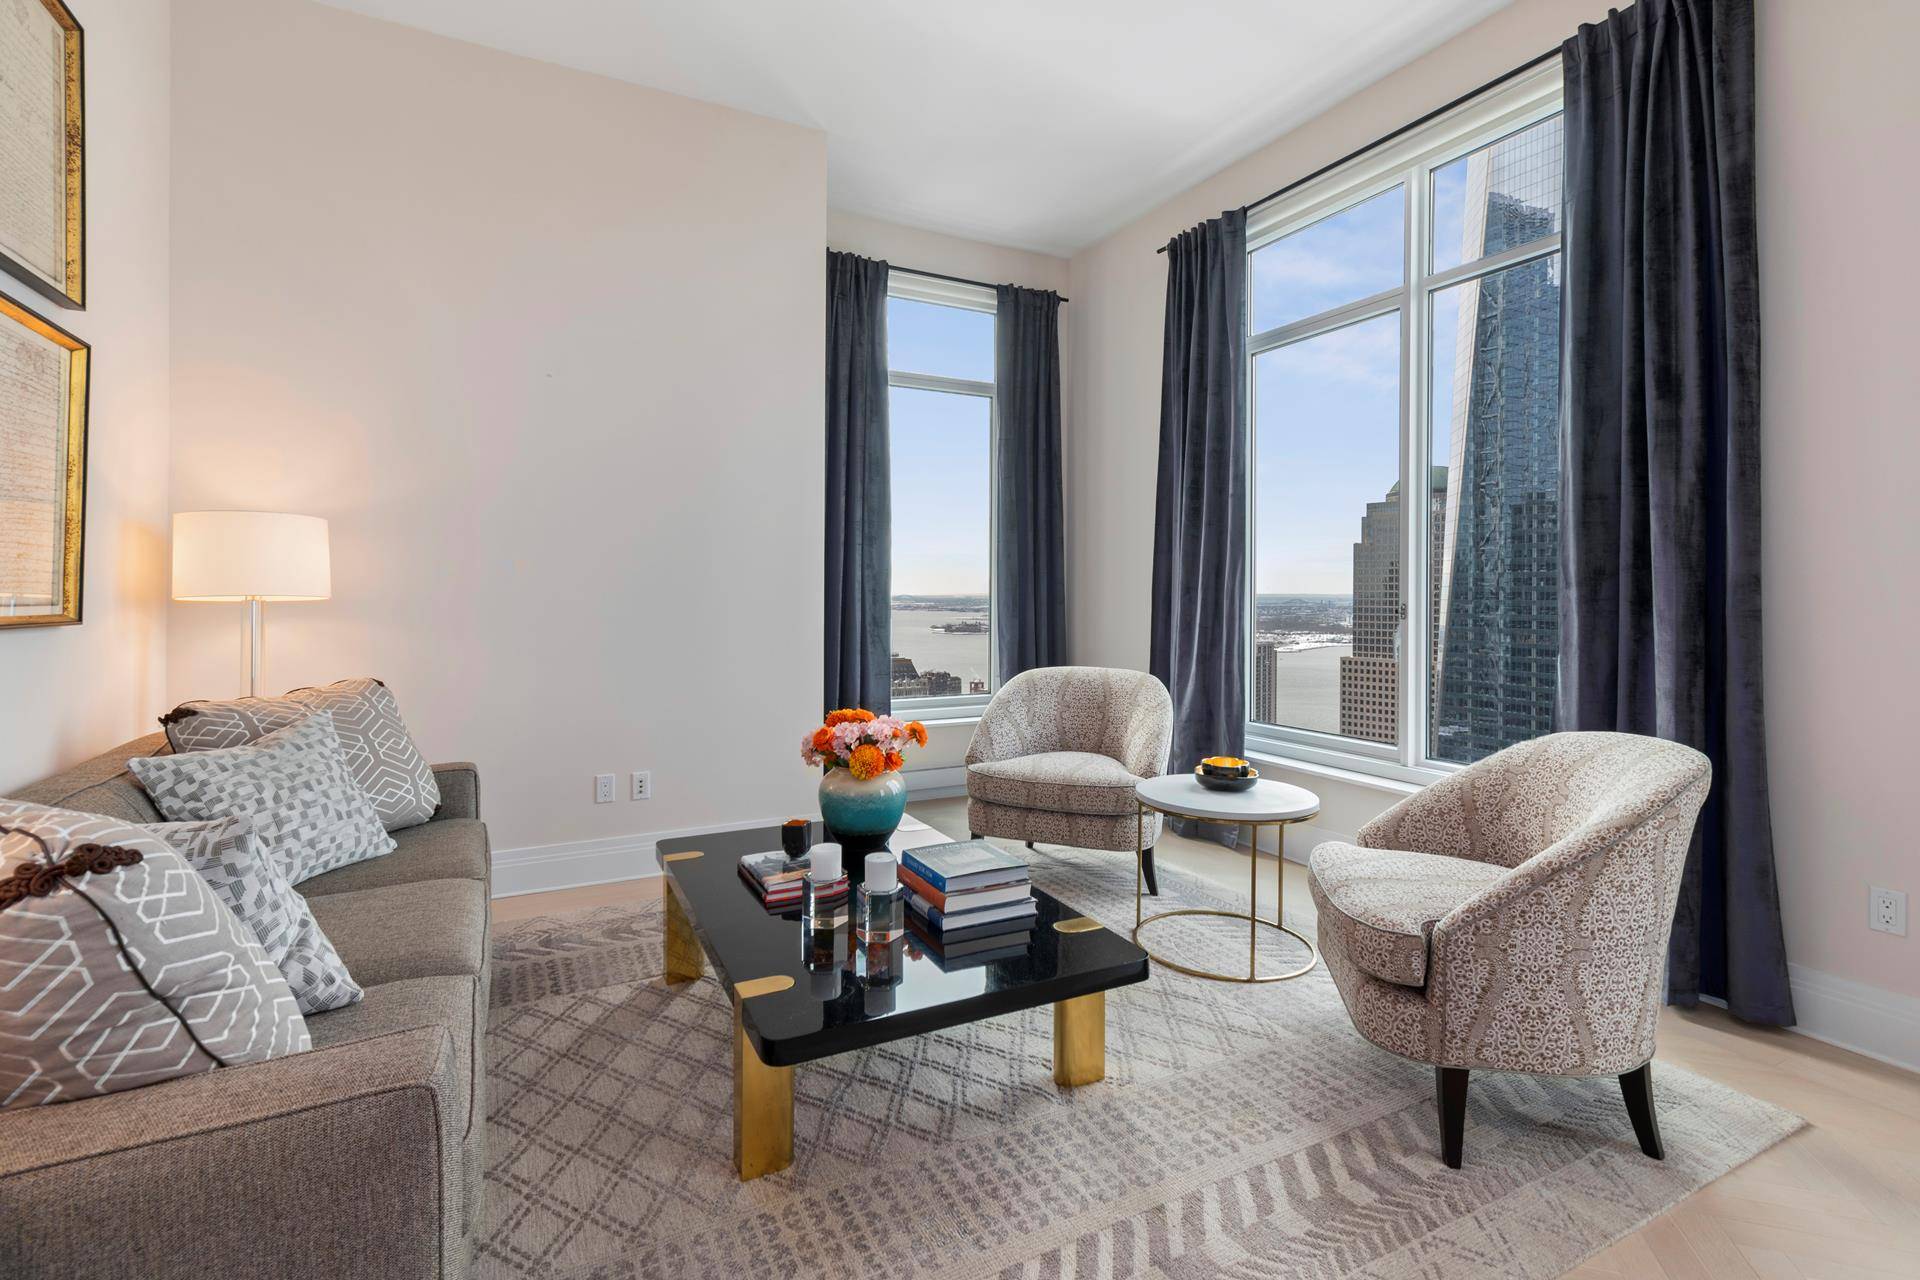 The apartment is available furnished and unfurnishedWelcome to one of the most desirable apartments at 30 Park Place.